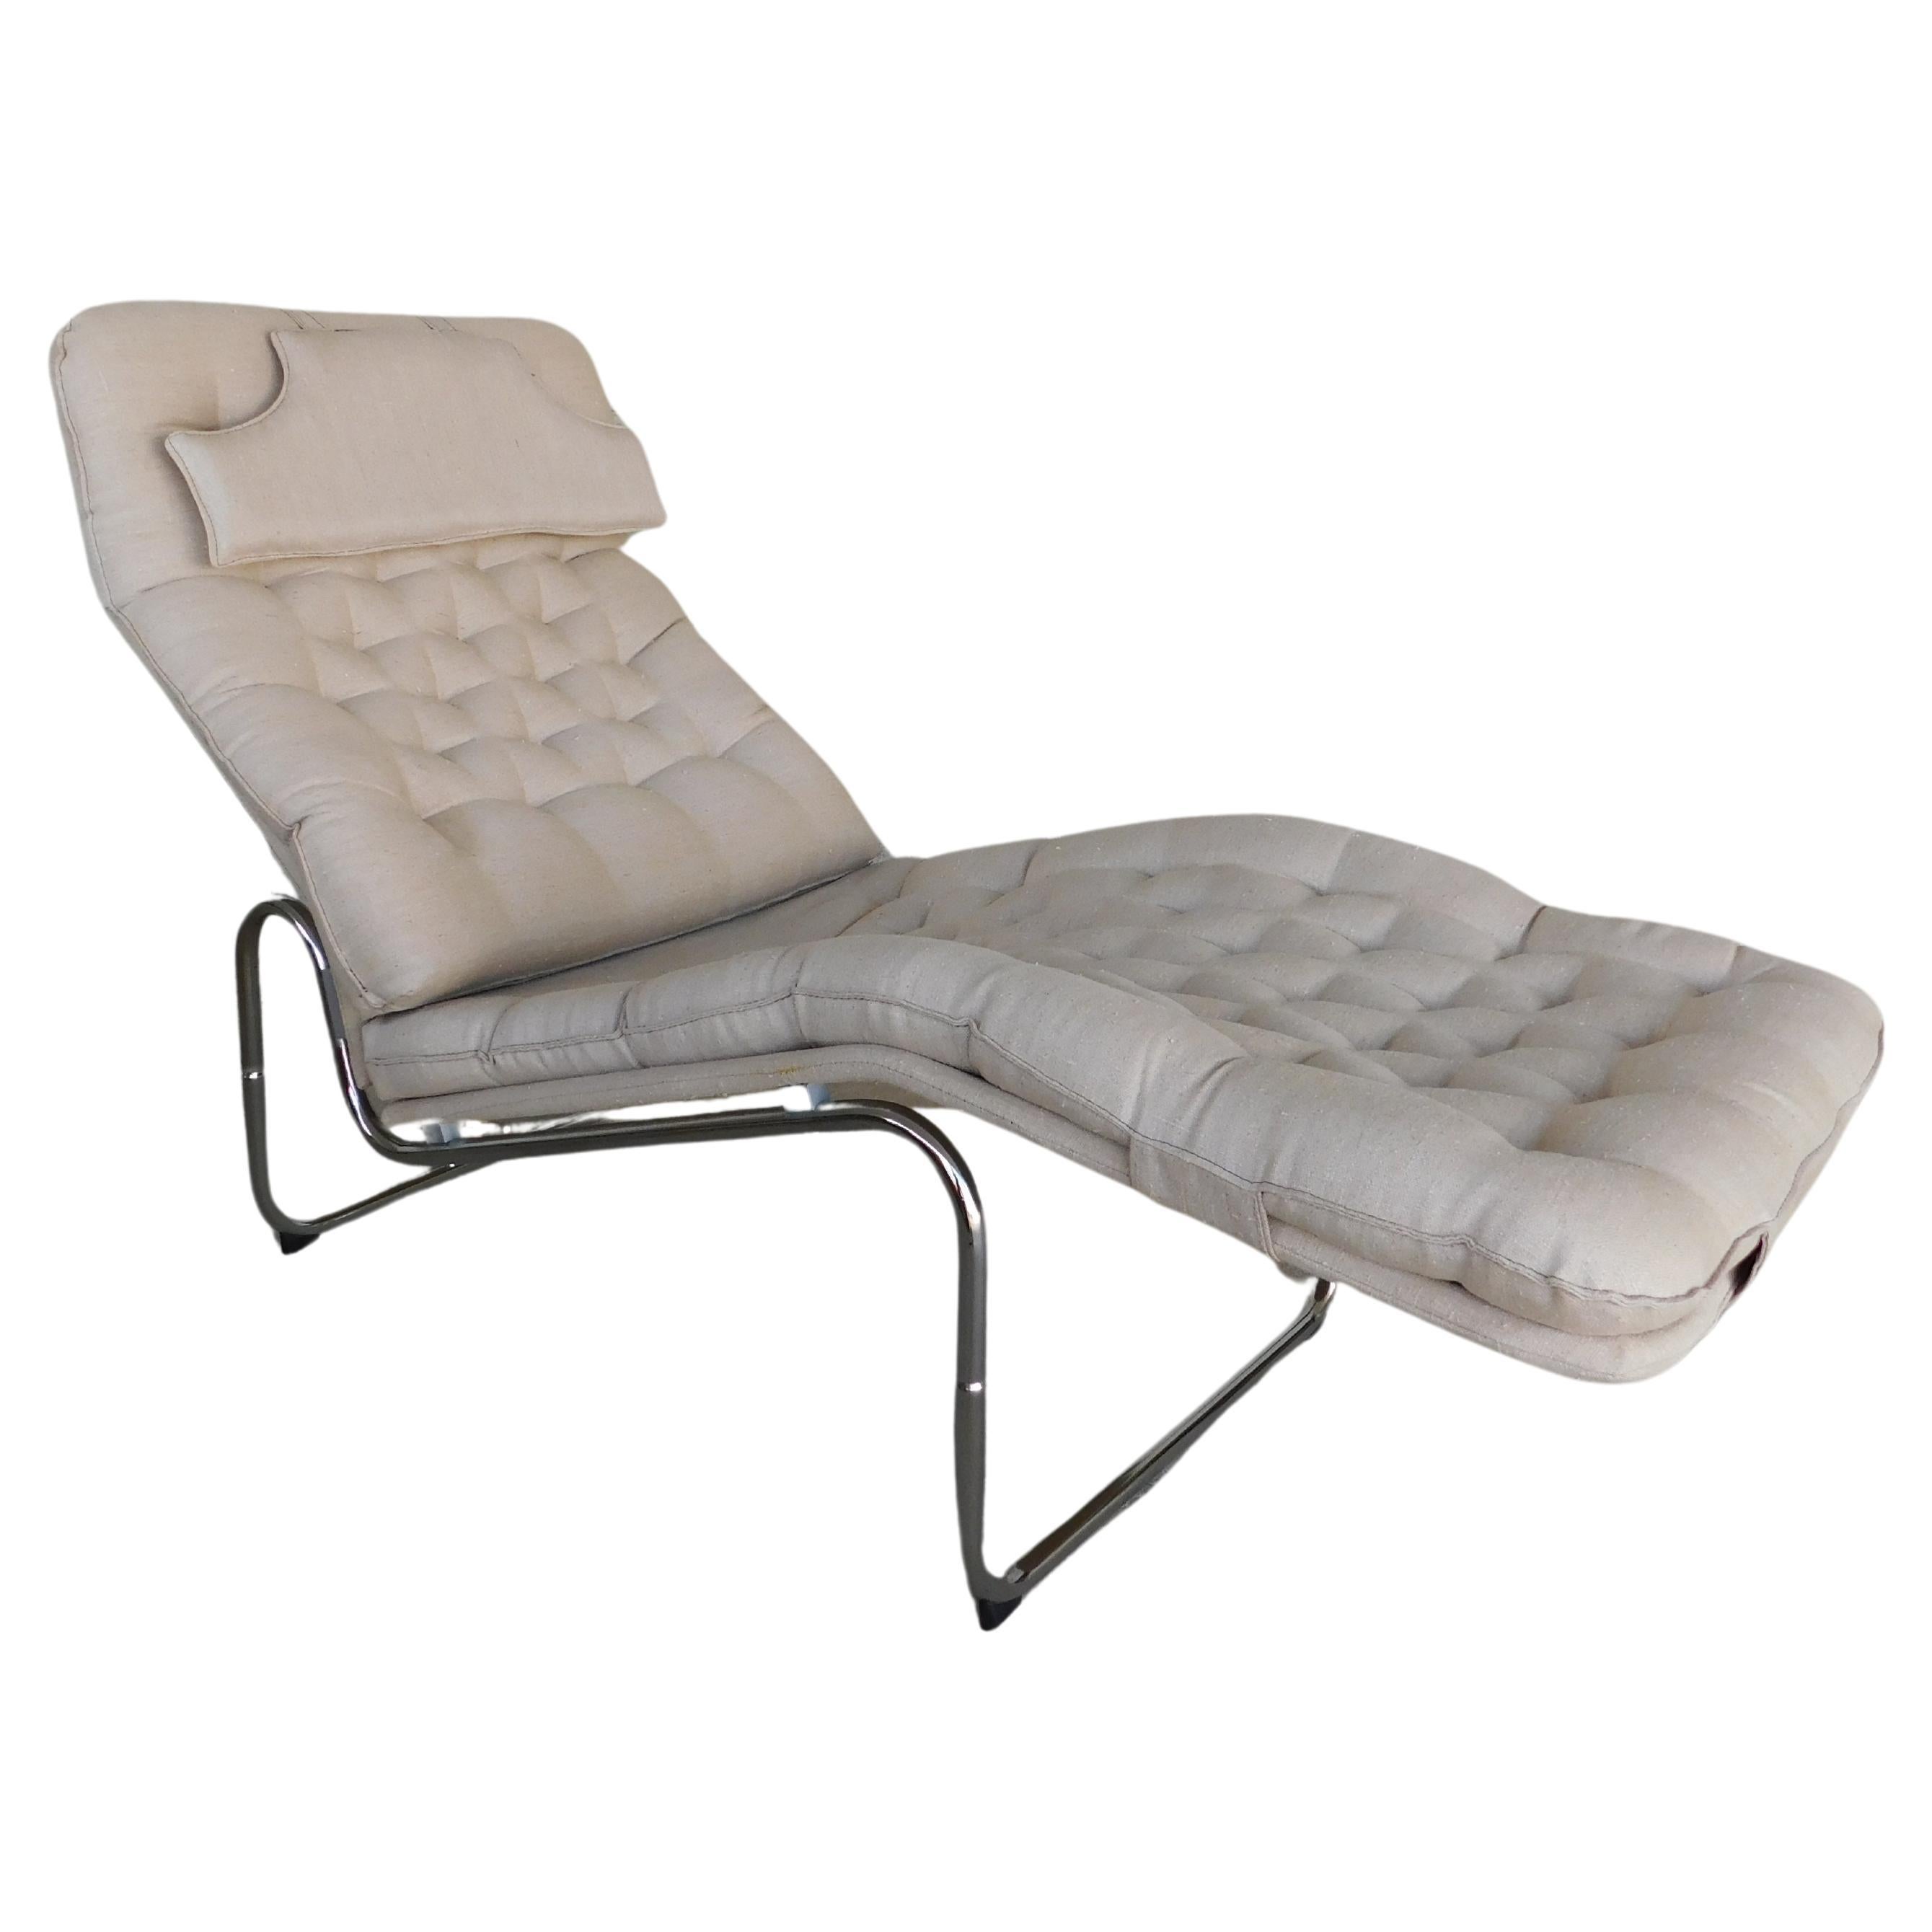 Kroken Lounge Chair by Christer Blomquist For Sale